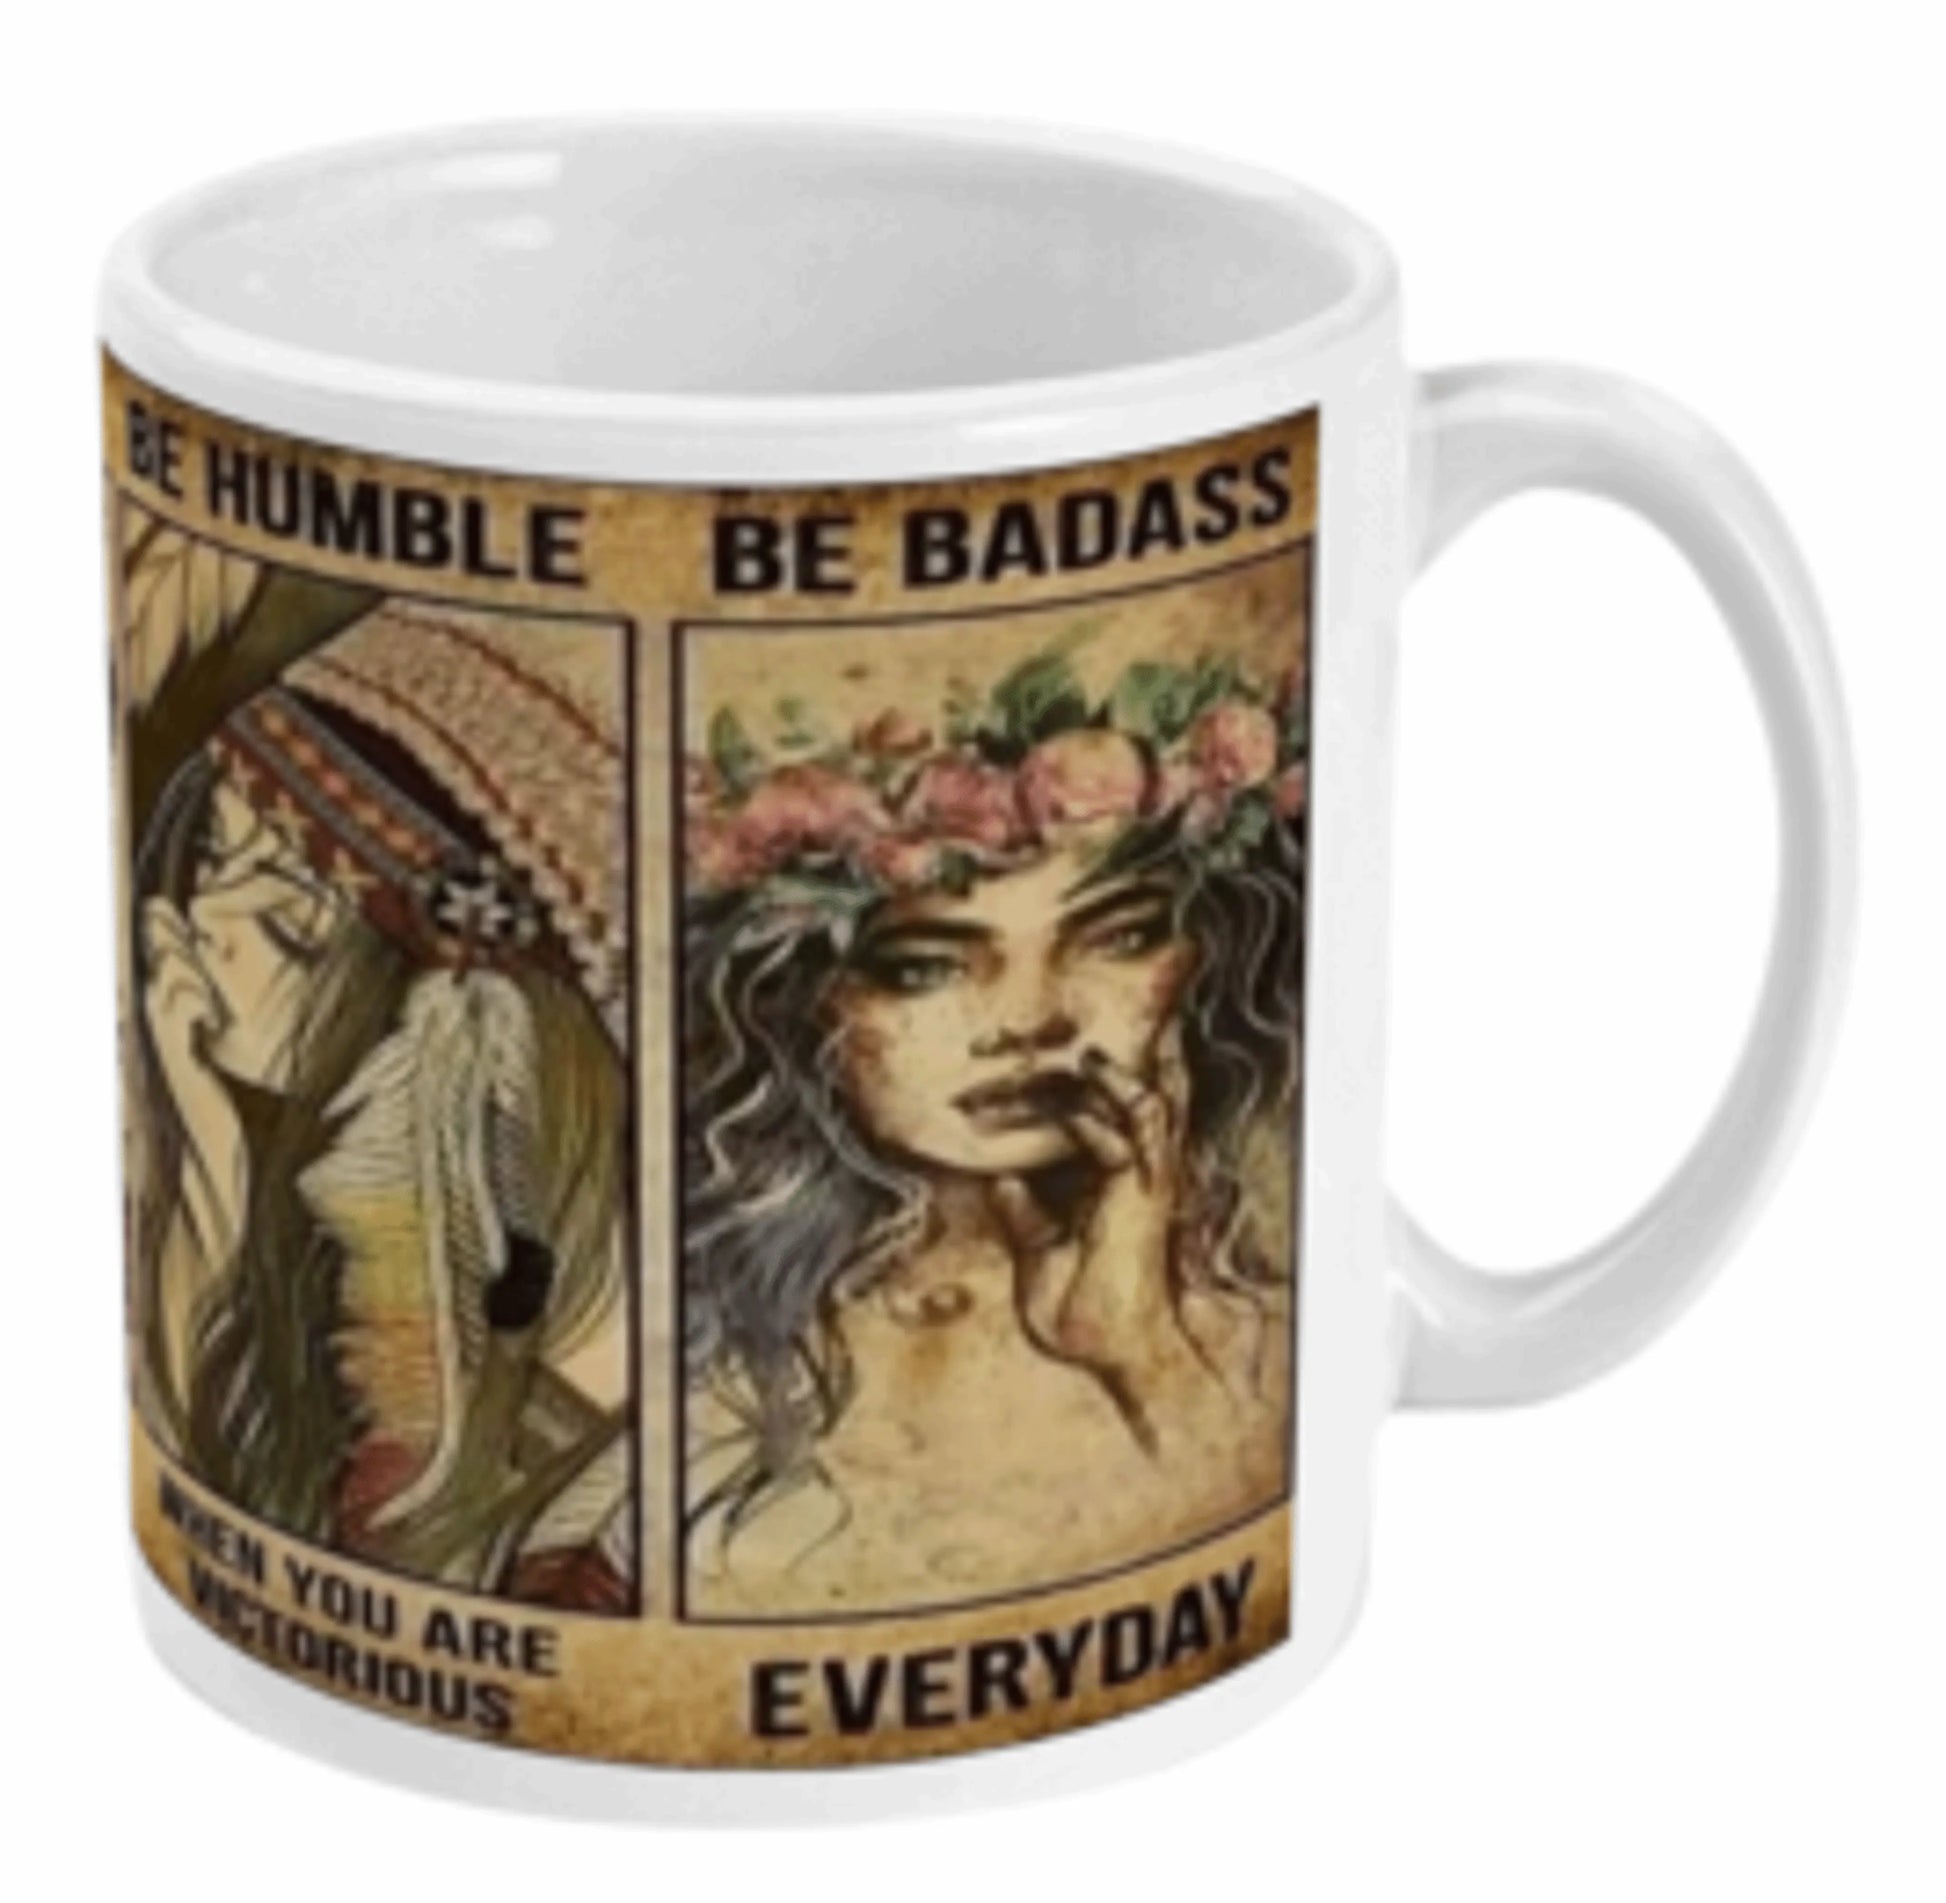  Be Strong Be Brave Coffee Mug by Free Spirit Accessories sold by Free Spirit Accessories